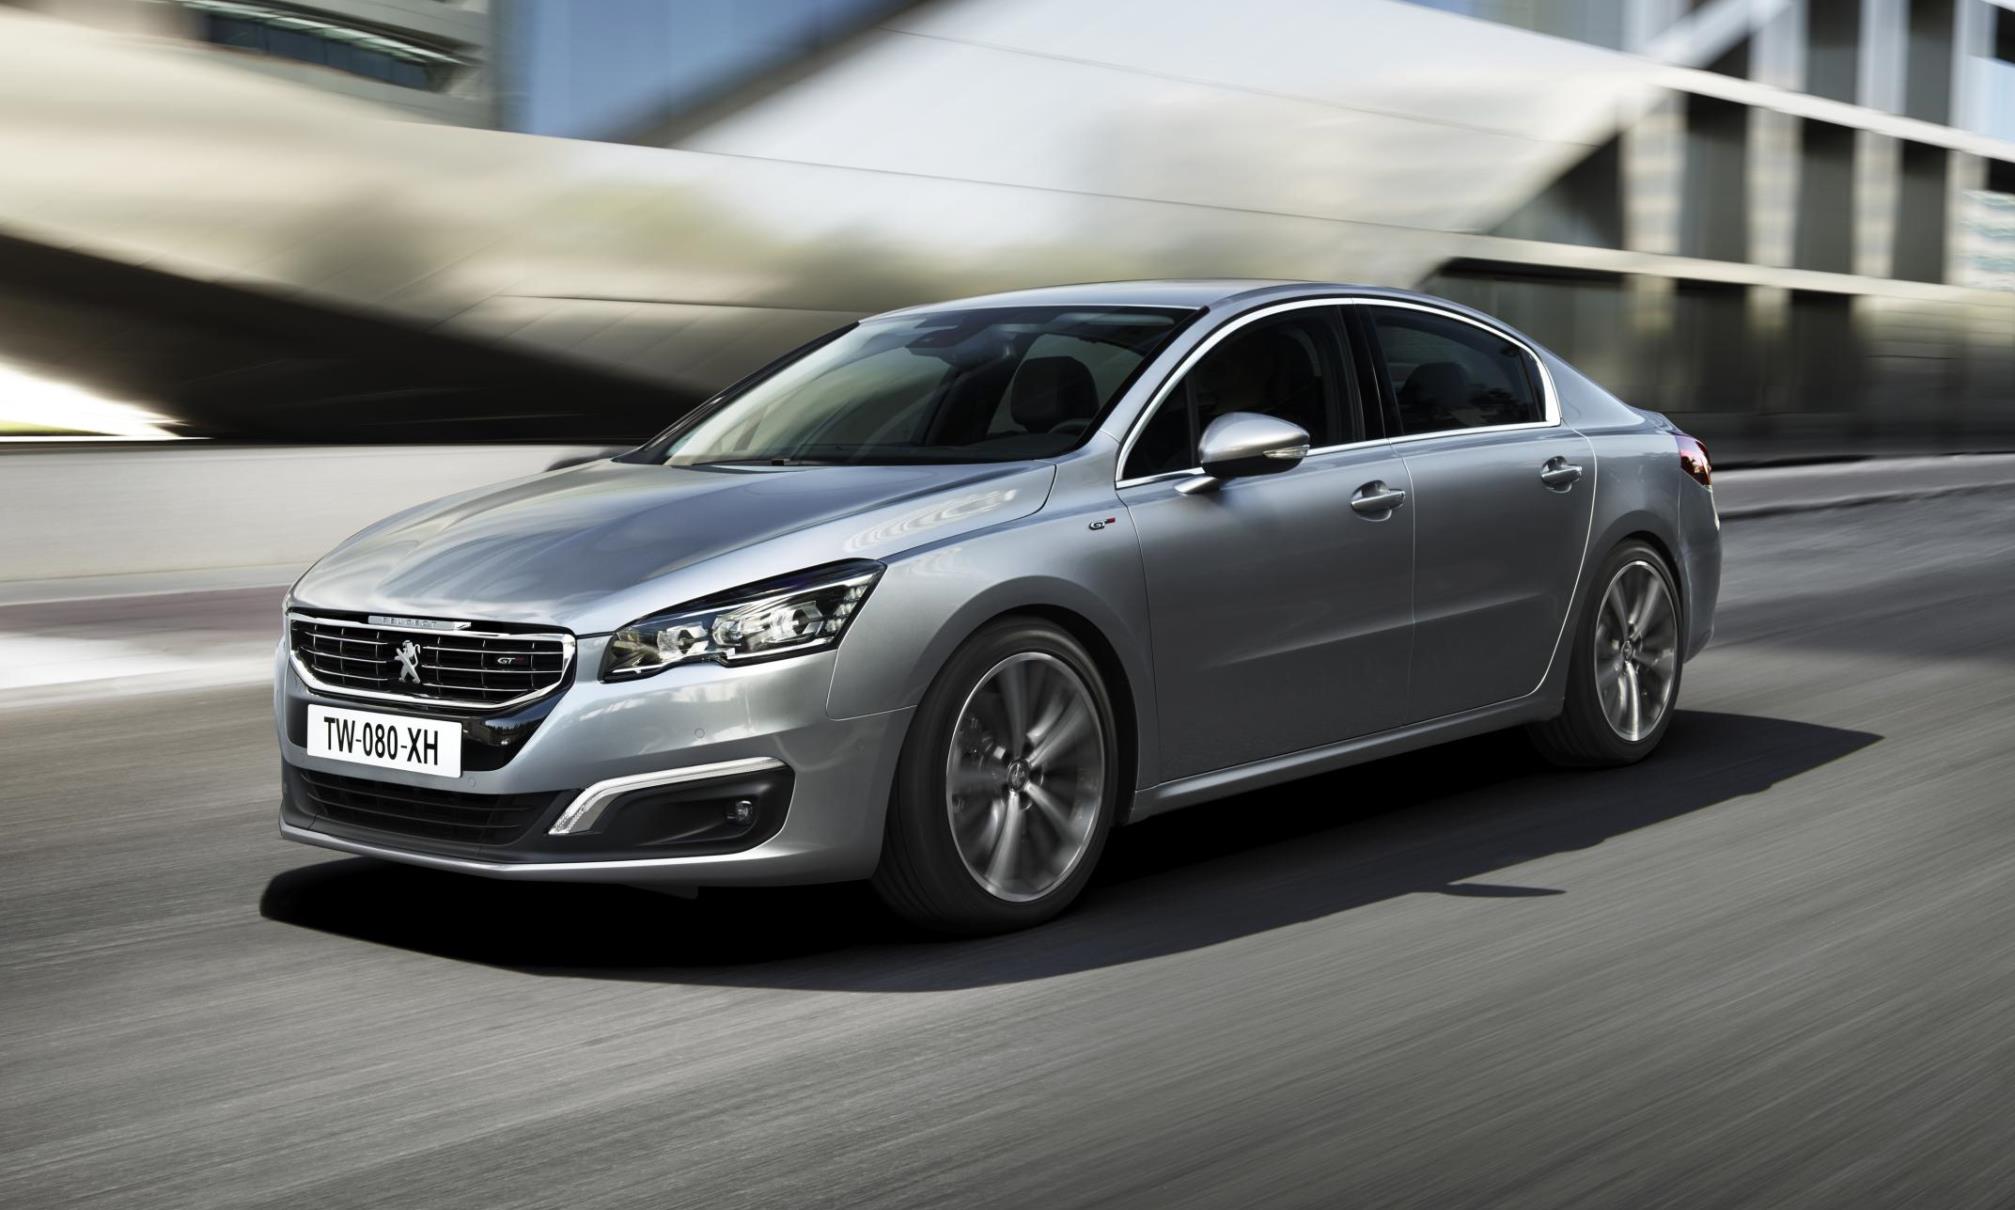 Peugeot 508 GT 2.2 HDi (2012) Double Apex